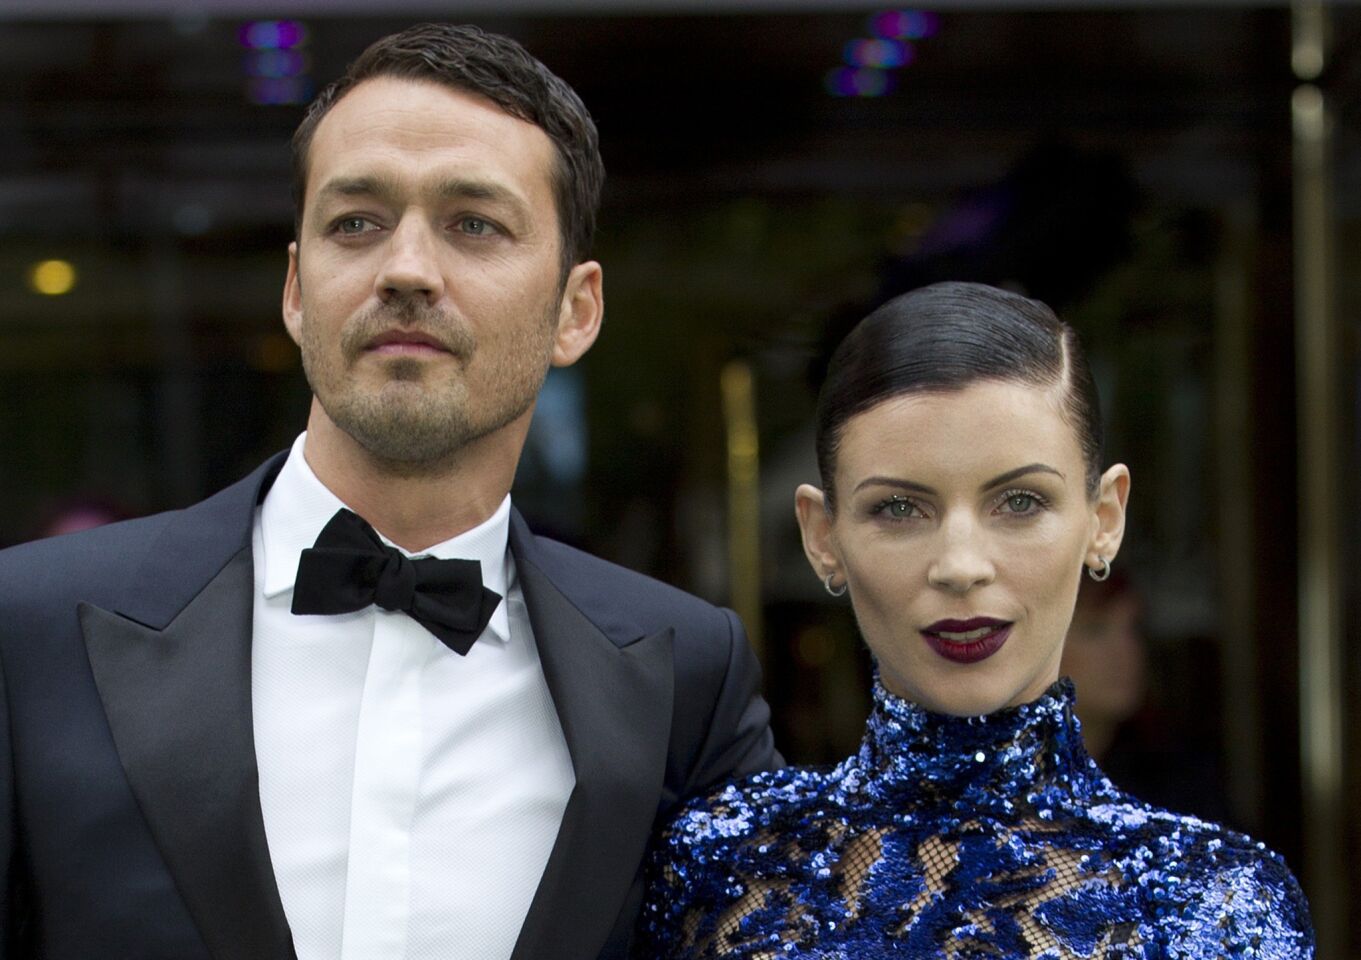 British model and actress Liberty Ross on Jan. 25 filed for divorce from Rupert Sanders, the "Snow White and the Huntsman" director who infamously cheated on her last summer with actress Kristen Stewart. She was asking for joint custody of their 5- and 7-year-old children, spousal support and attorney's fees, according to court documents. Sanders, who filed his response the same day she filed her petition, also was seeking joint custody but wanted to share the legal fees. What Stewart called a "momentary indiscretion" with Sanders — pictures of which appeared more than momentarily all over the Internet — happened back in July 2012. Both parties publicly apologized at the time, with Sanders, now 42, saying in a statement to People, "I am utterly distraught about the pain I have caused my family. My beautiful wife and heavenly children are all I have in this world. I love them with all my heart. I am praying that we can get through this together." MORE: Liberty Ross files for divorce from director Rupert Sanders